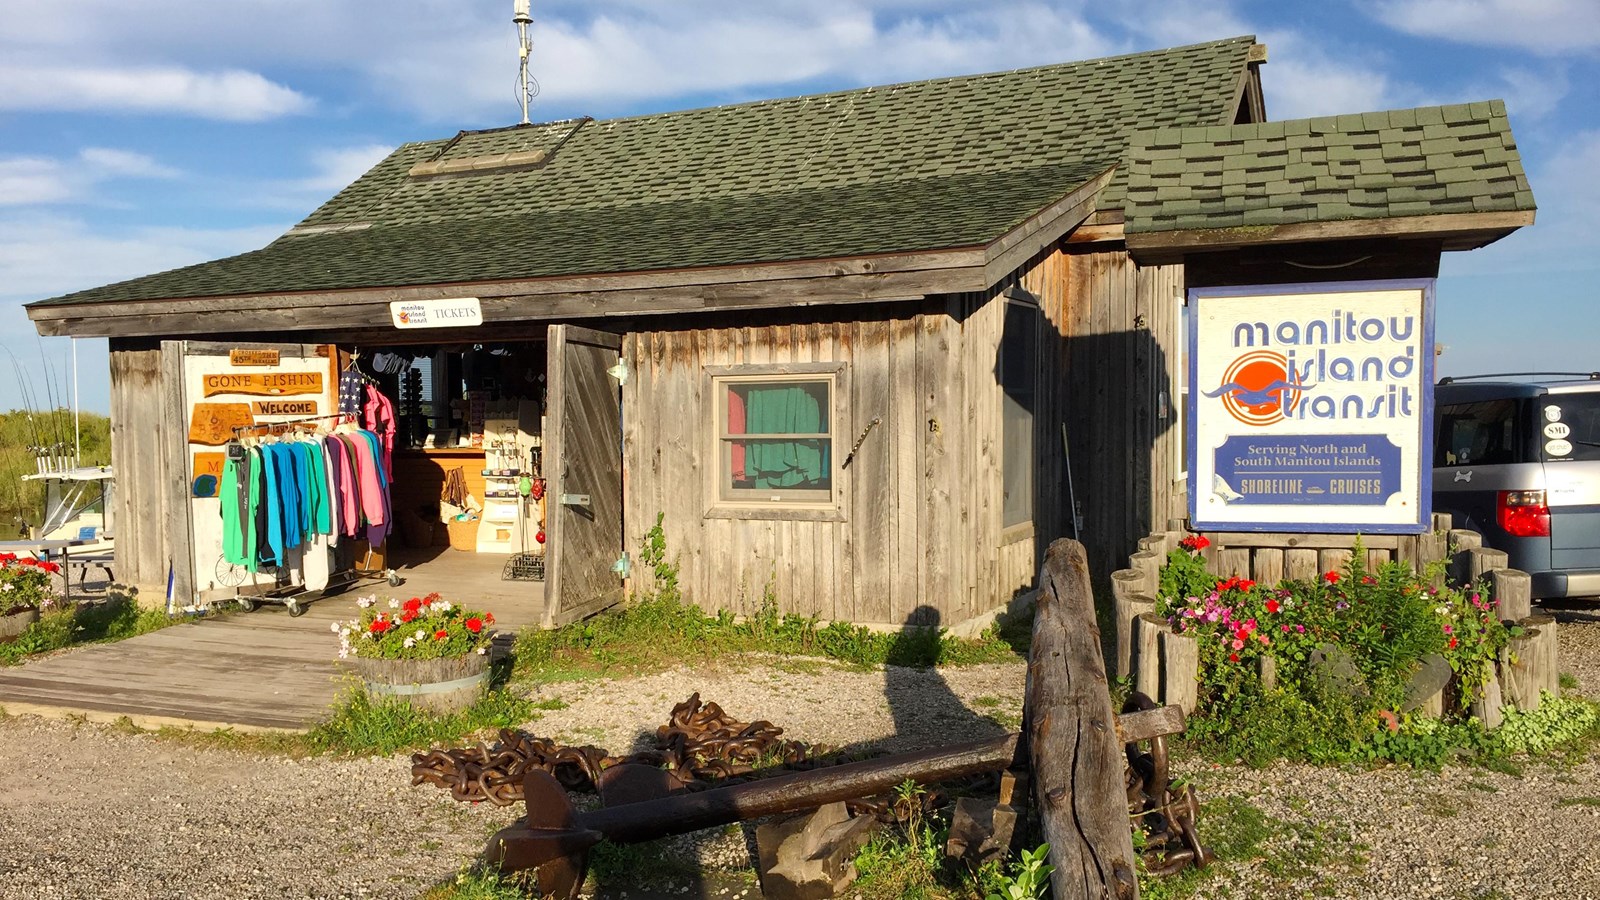 Historic shanty building with open doors showing brightly colored tshirts and merchandise